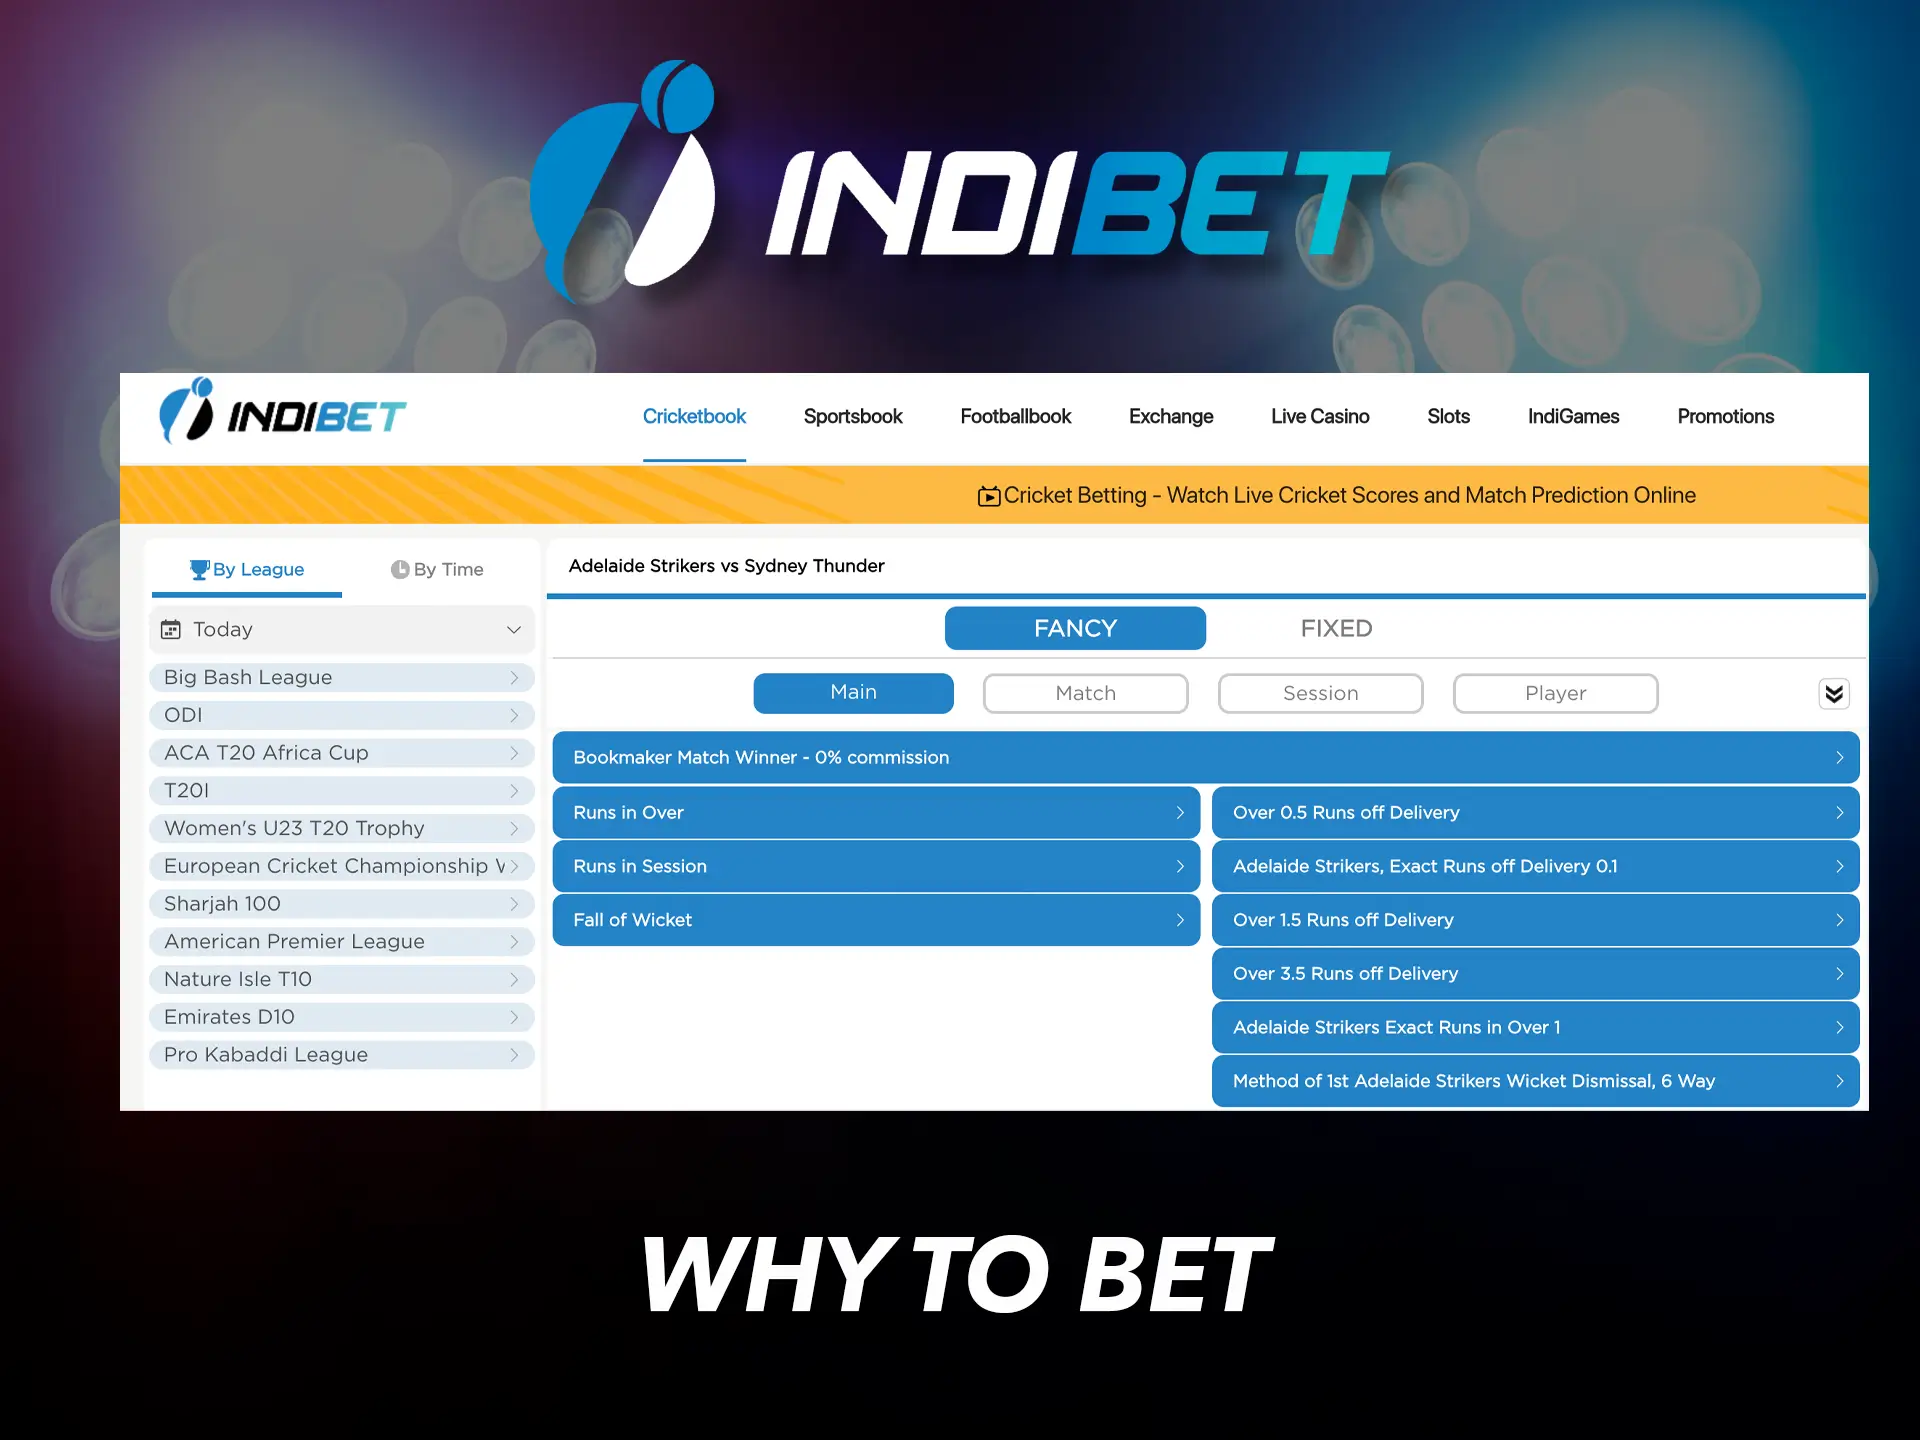 Take advantage of Indibet's innovative and trusted casino in India.